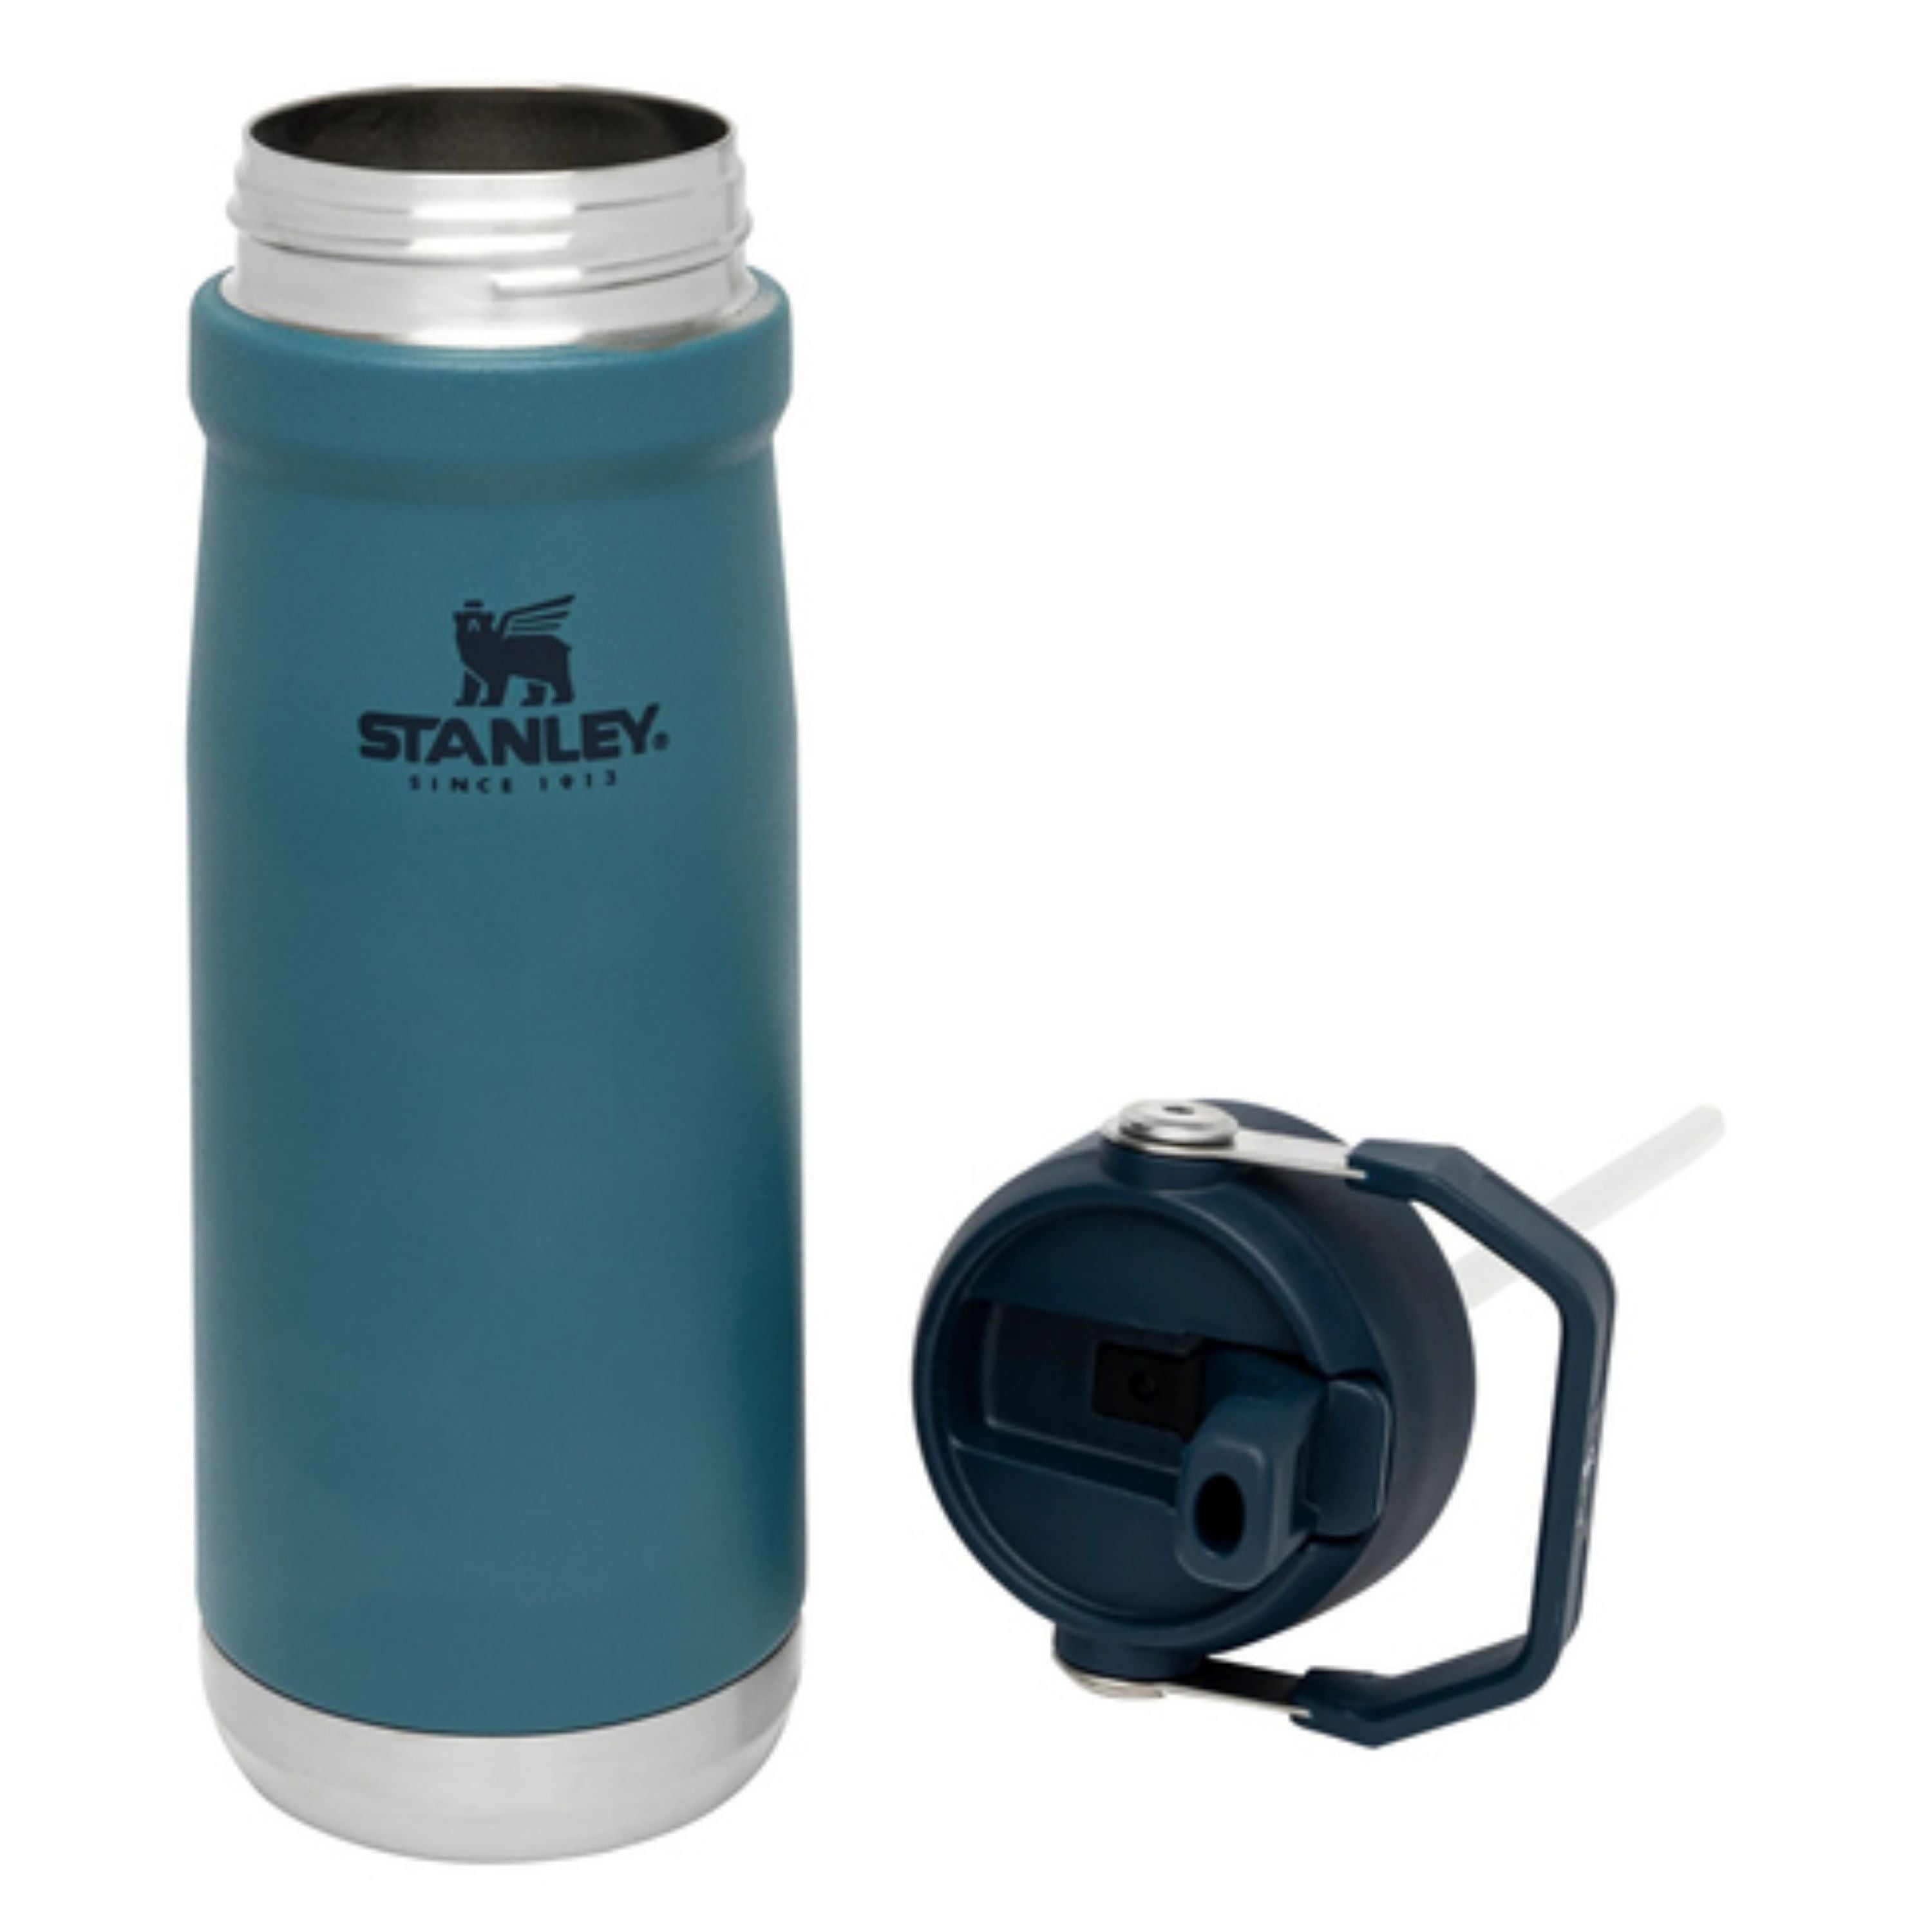 Insulated bottle flip straw "The iceflow" 22 oz